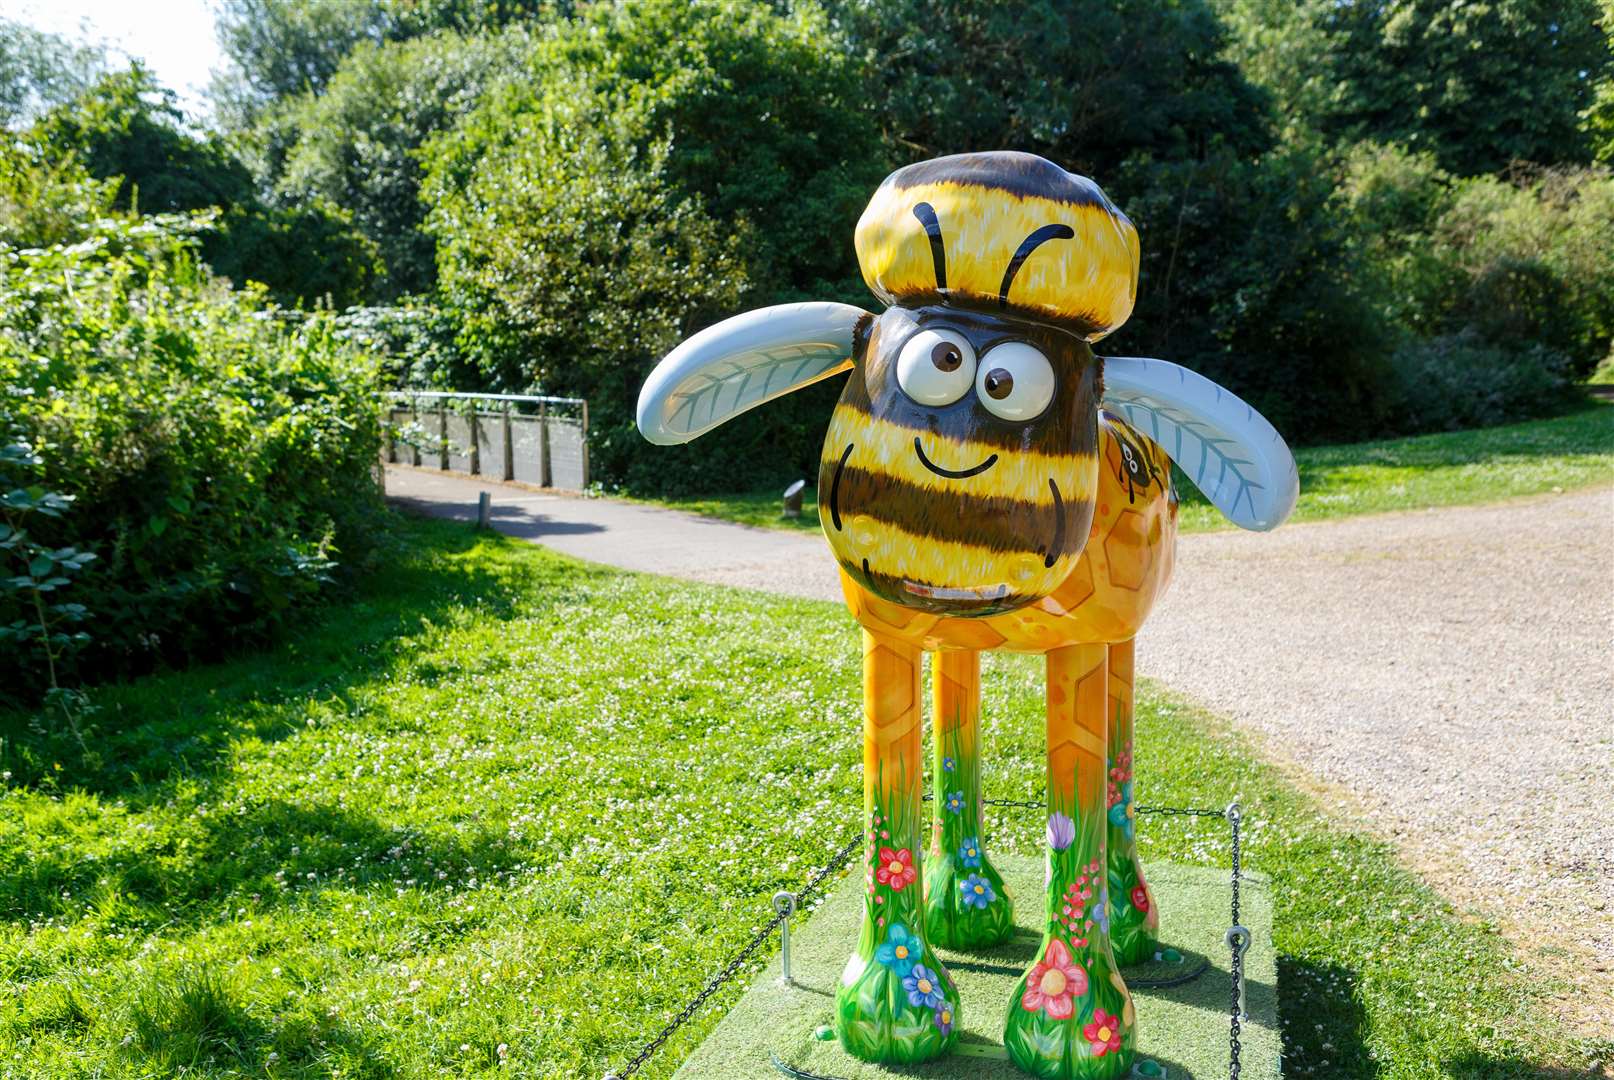 Each Shaun the Sheep sculpture will be sold off at auction. Picture: Steve James Photography